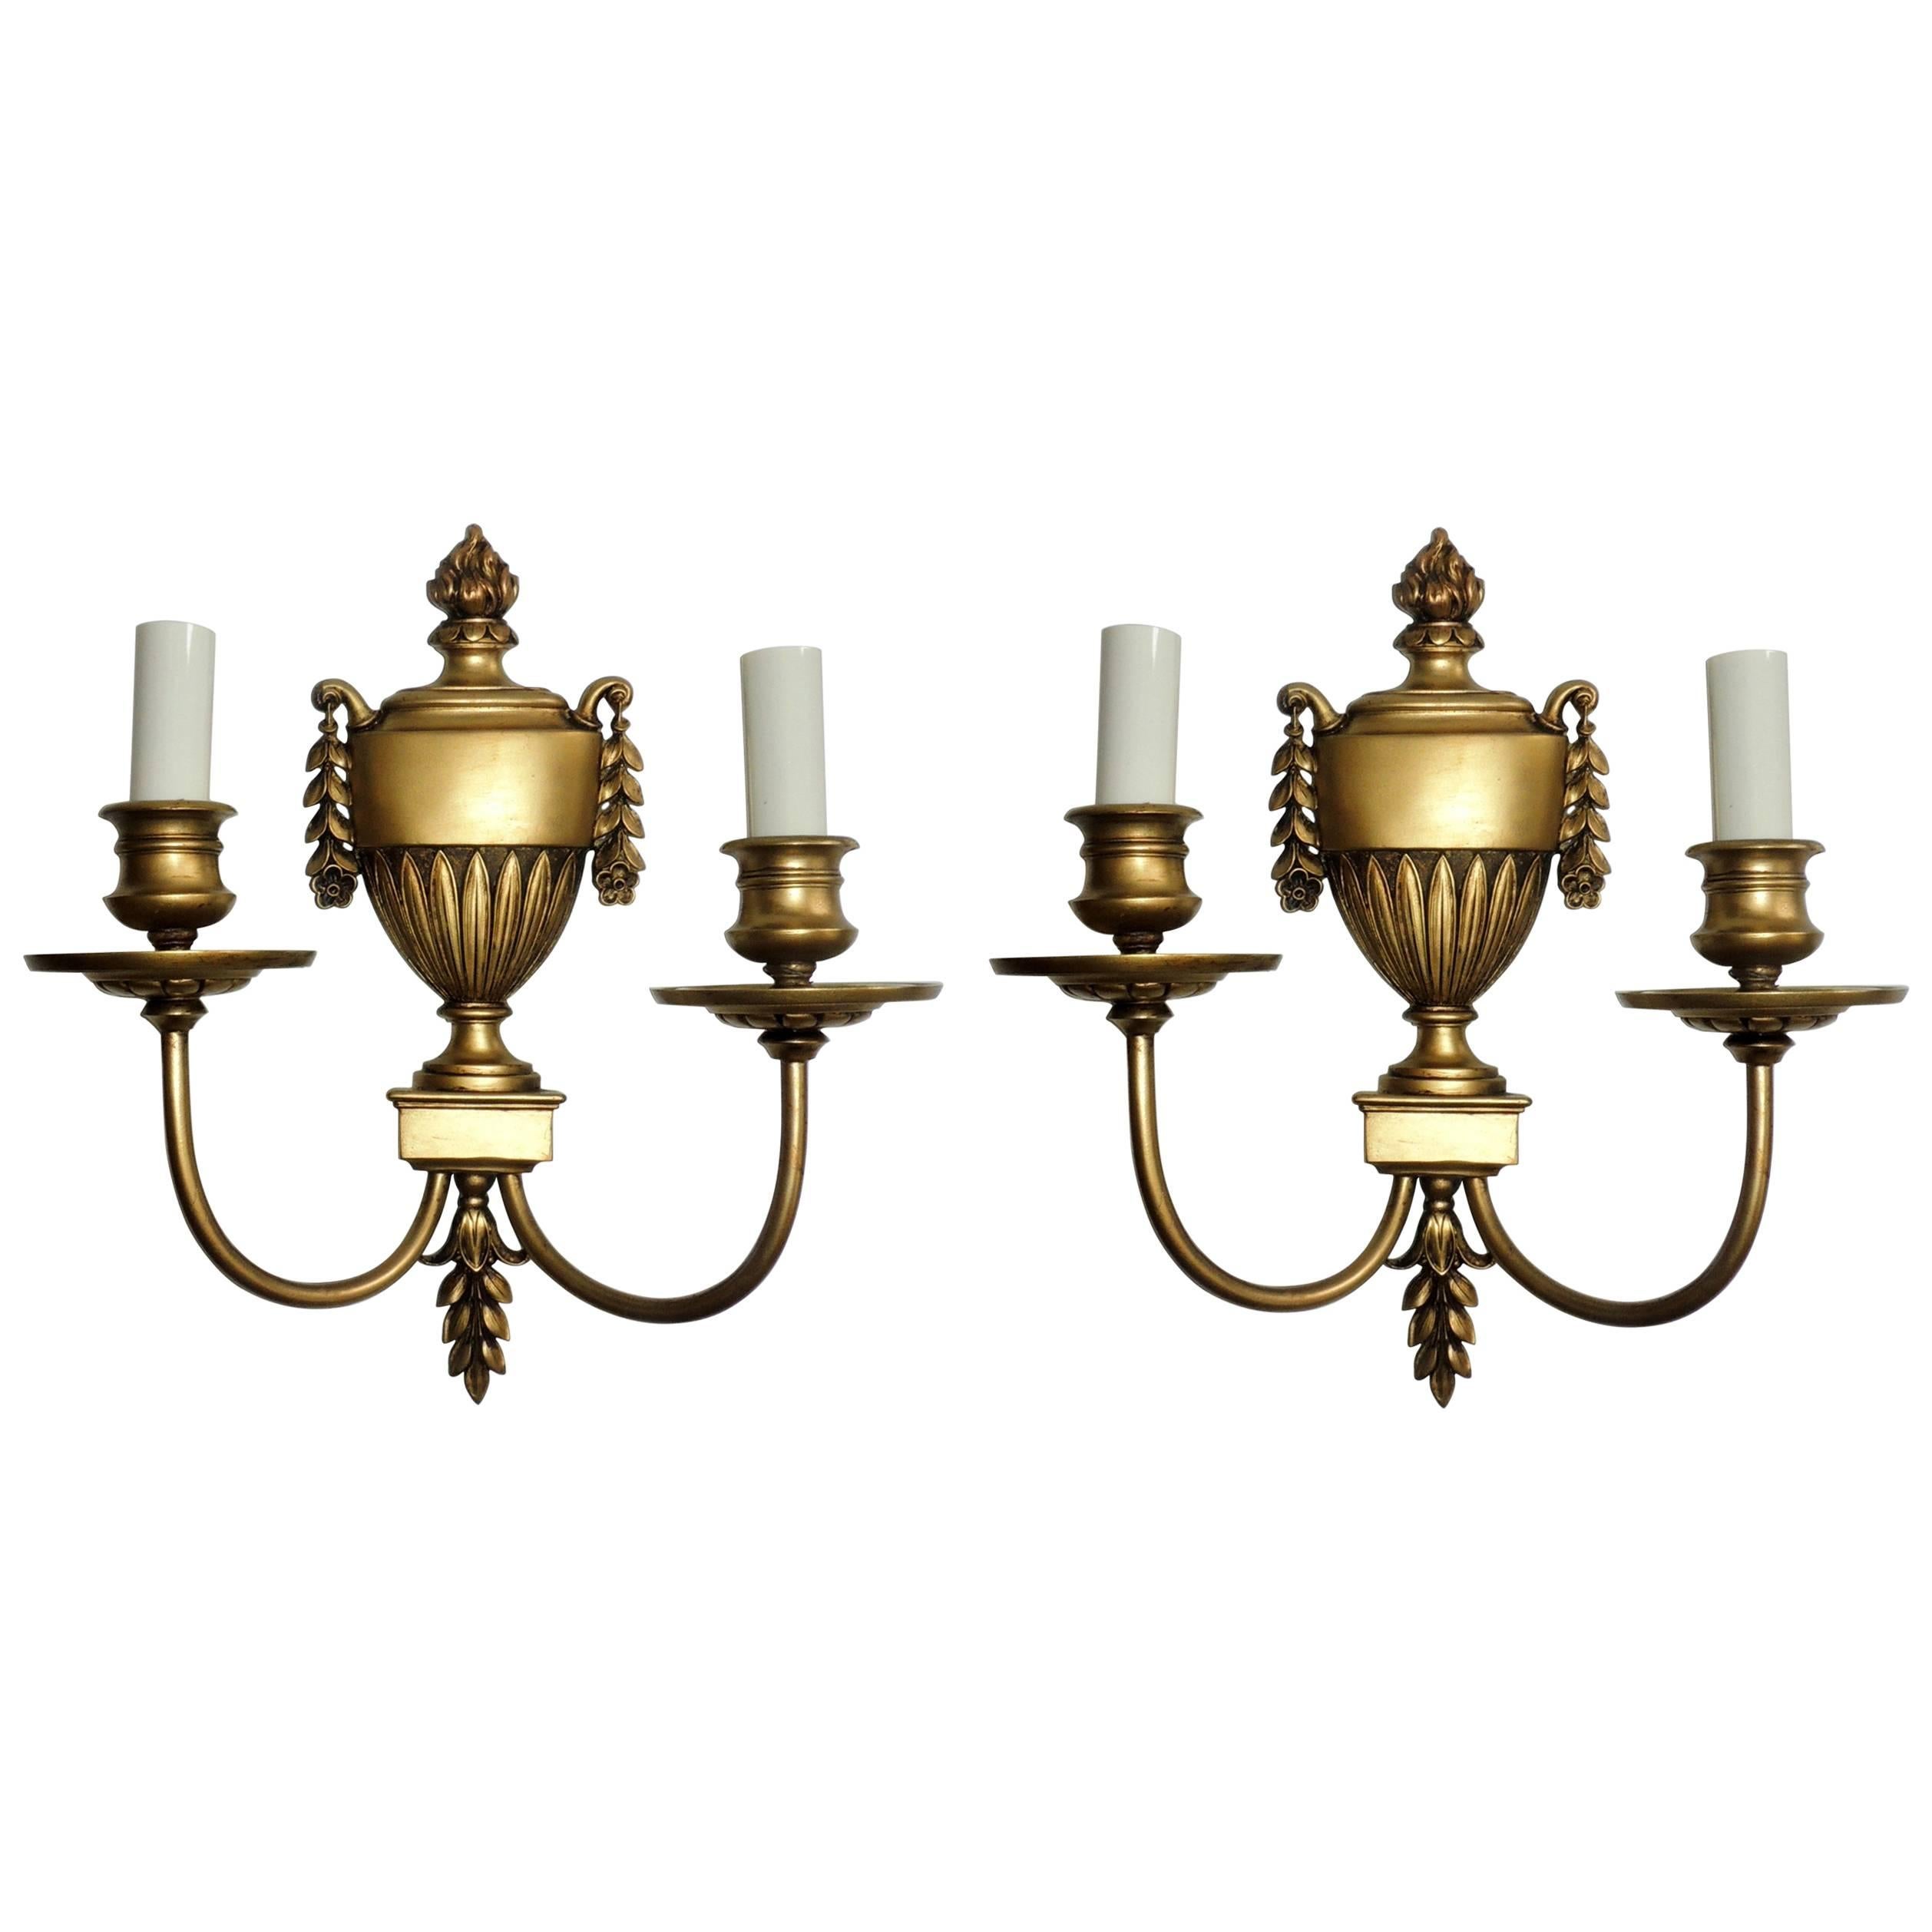 Wonderful Regency Neoclassical Pair Urn Form Bronze Empire E.F. Caldwell Sconces For Sale